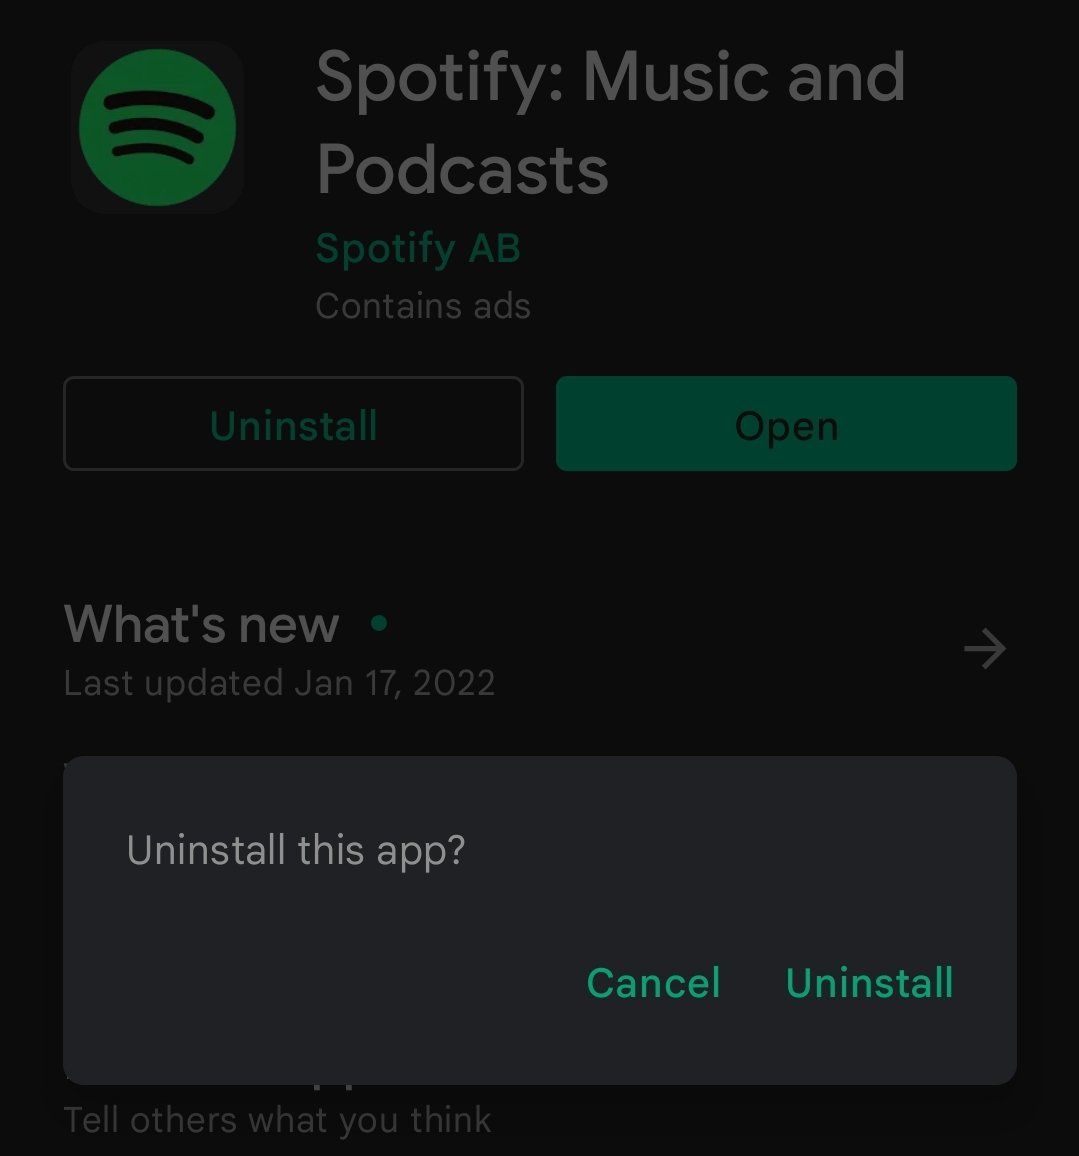 How to Uninstall Spotify